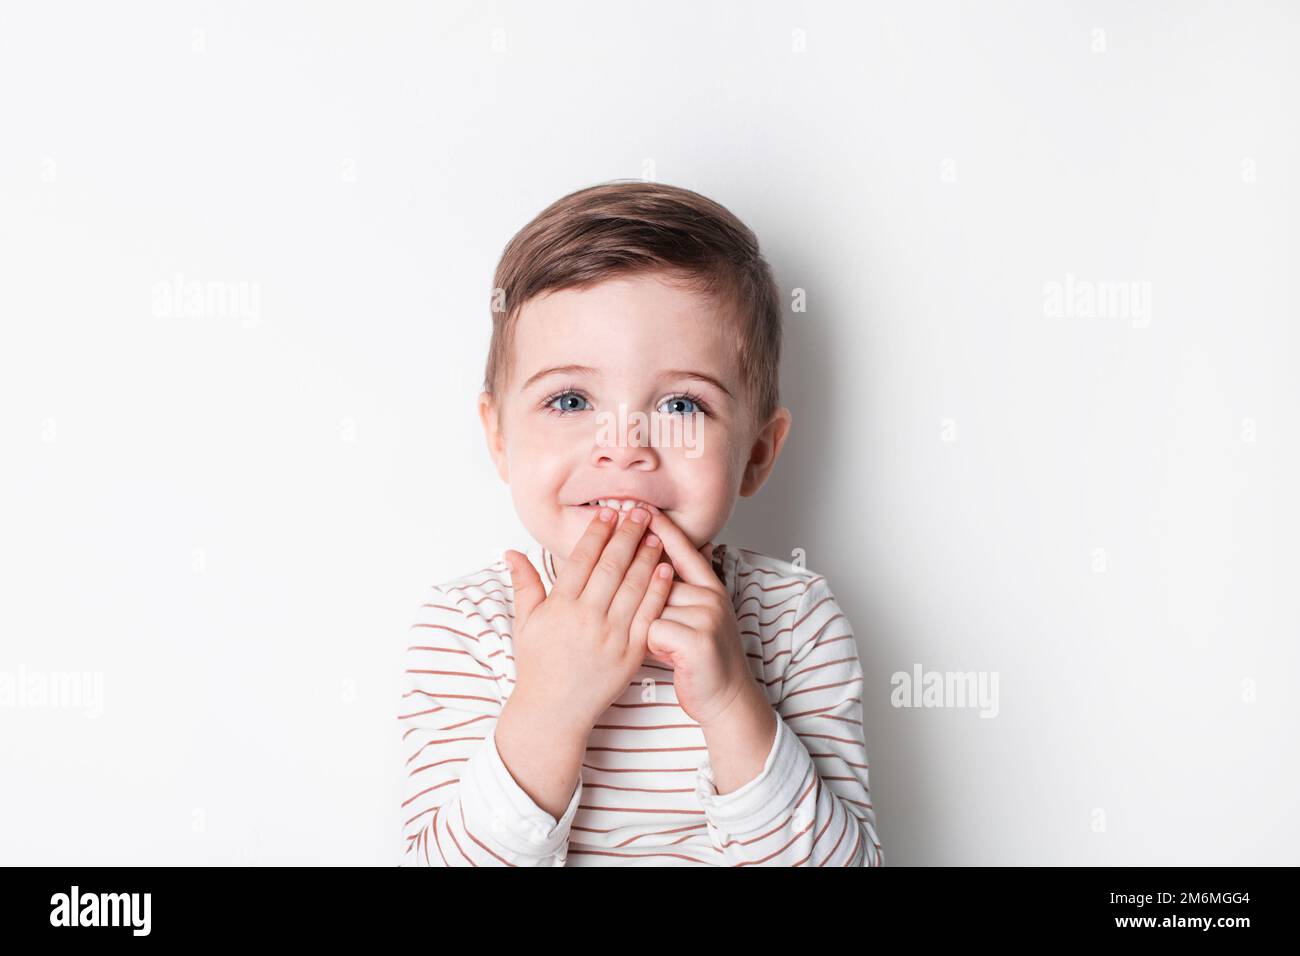 Beautiful invitation with happy toddler boy laugh. Healthy lifestyle. Kid life. Smiling happy child on white background Stock Photo